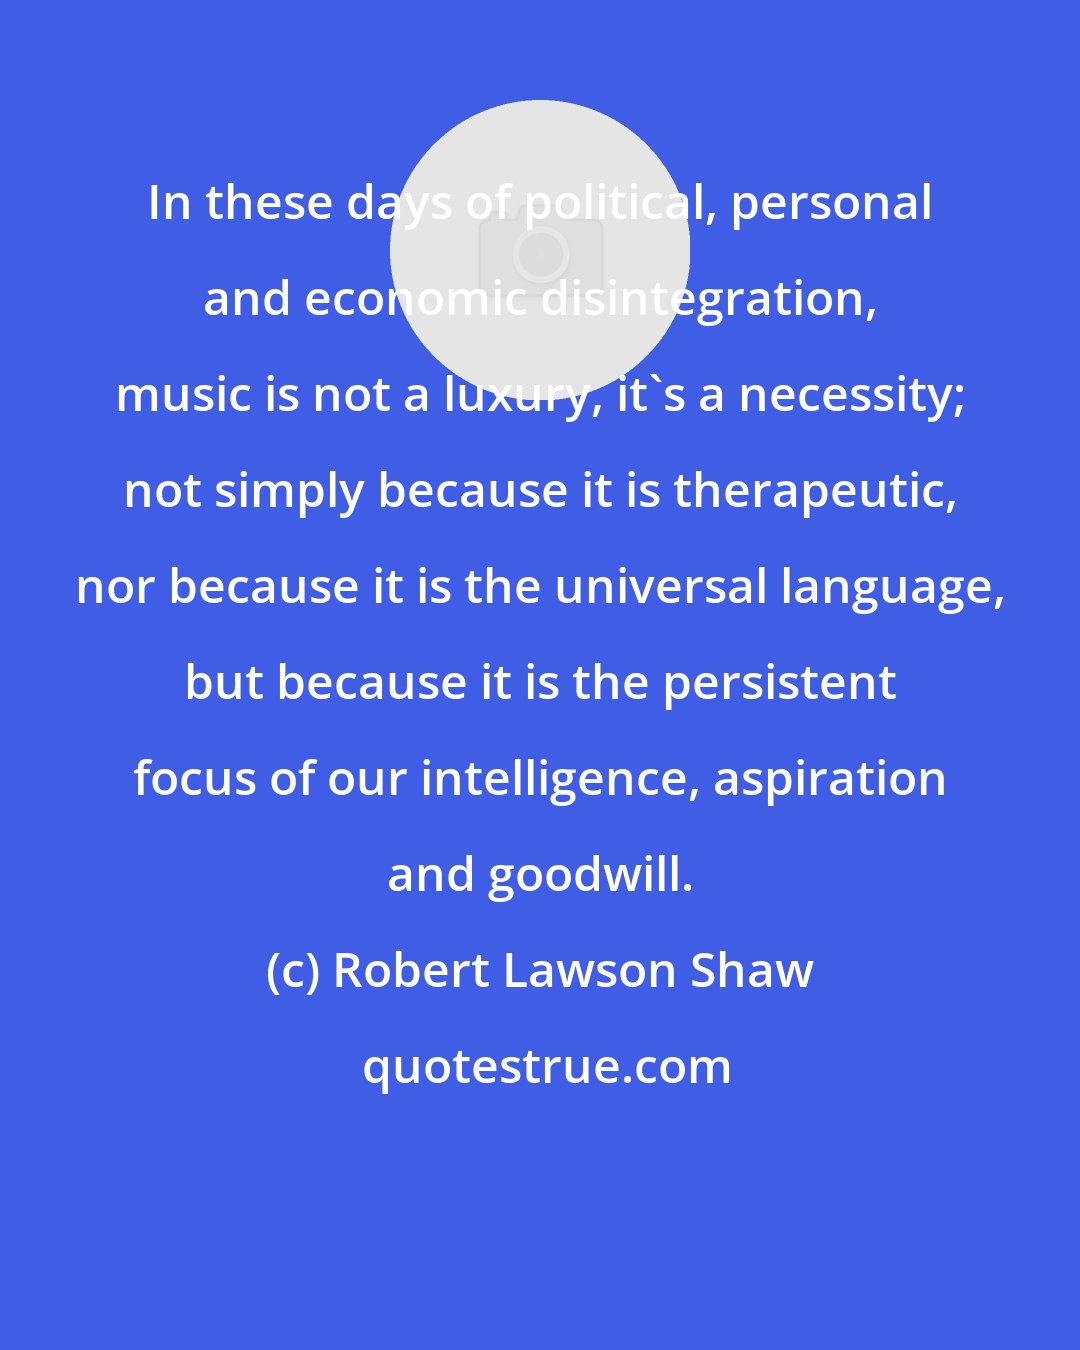 Robert Lawson Shaw: In these days of political, personal and economic disintegration, music is not a luxury, it's a necessity; not simply because it is therapeutic, nor because it is the universal language, but because it is the persistent focus of our intelligence, aspiration and goodwill.